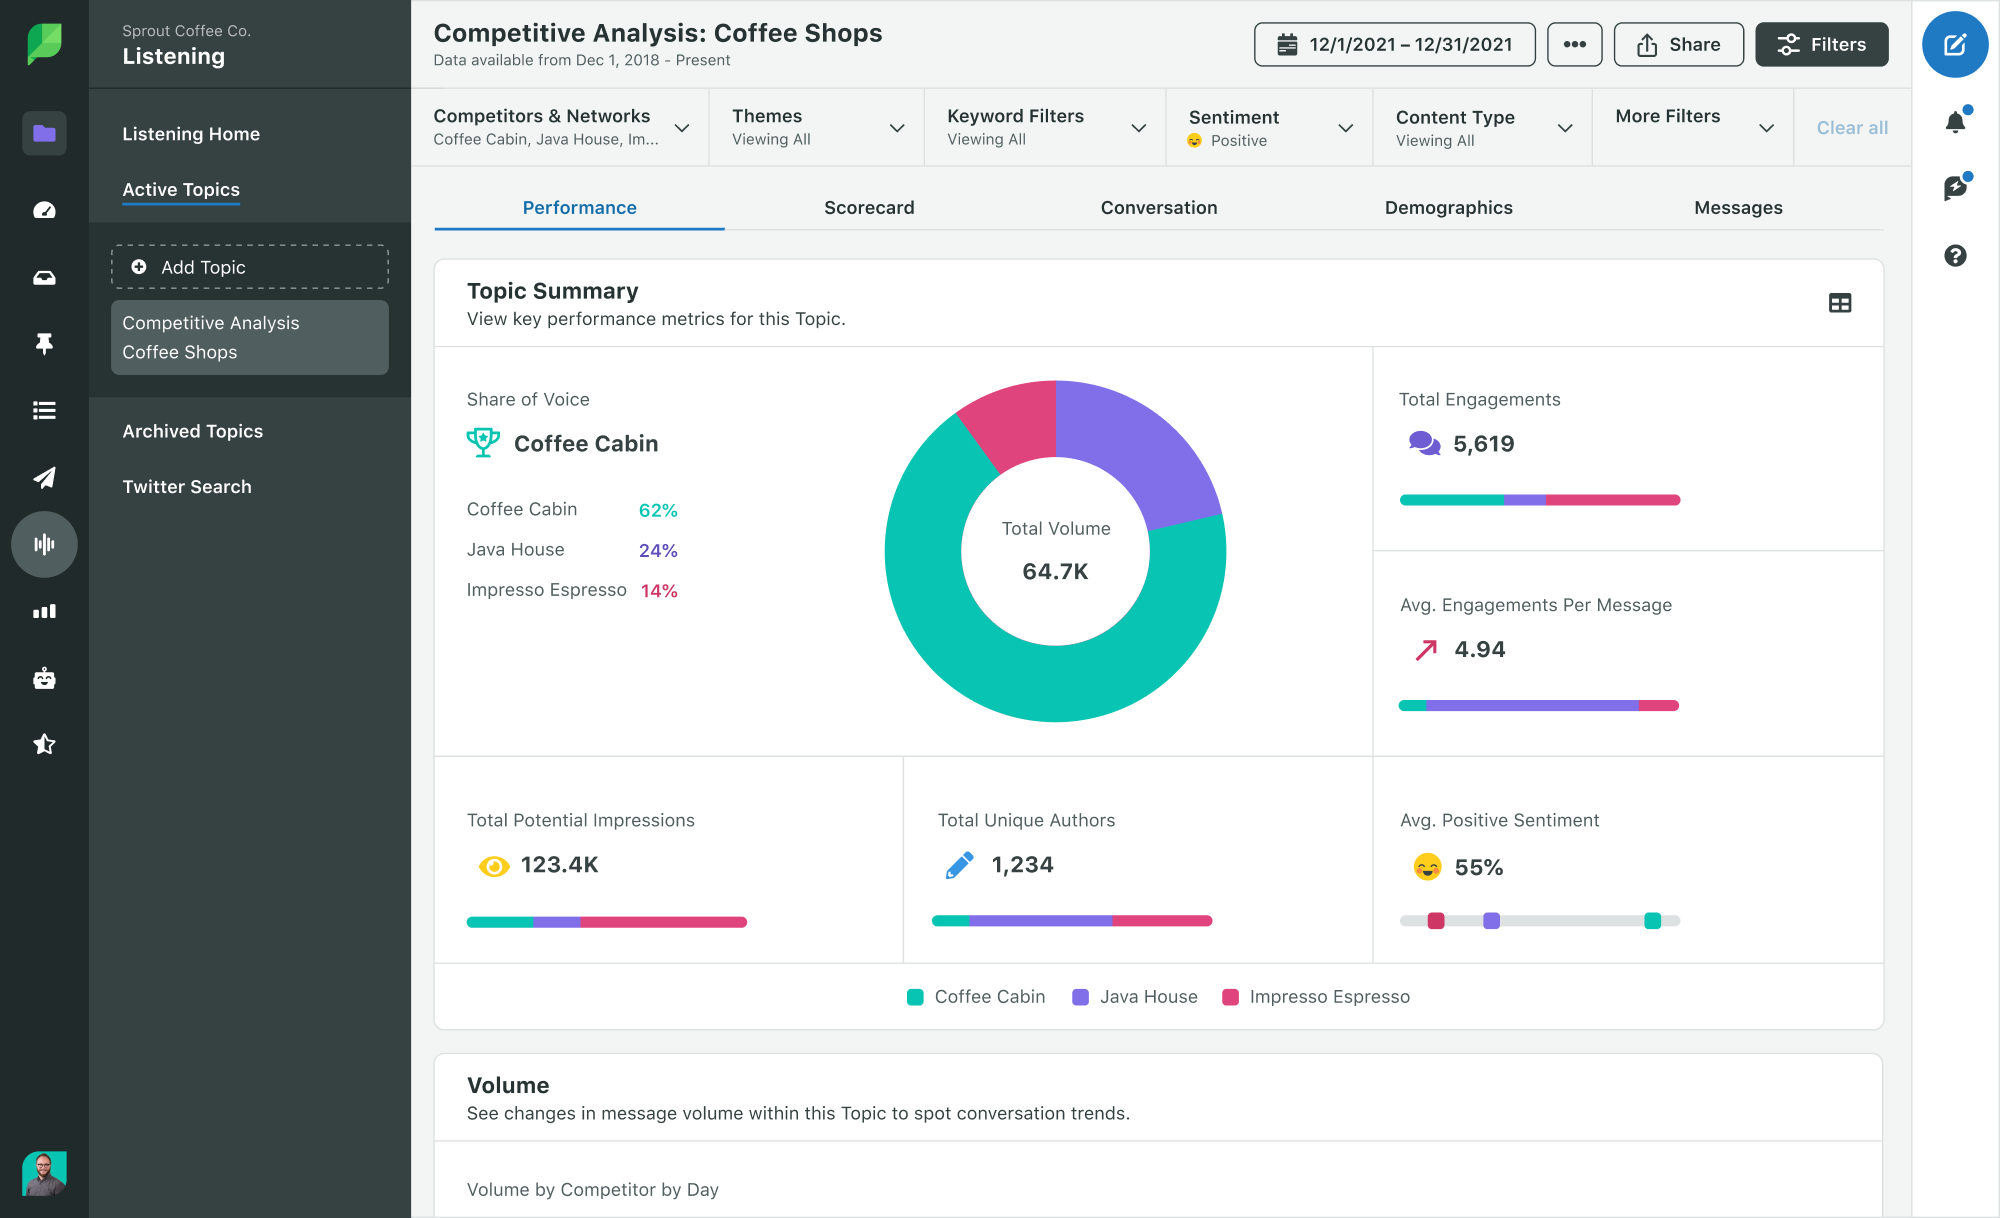 Screenshot of Sprout Social’s competitor analysis performance report showing metrics on various KPIs including topic summary, share of voice, total engagements and sentiment scores based on positive, negative and neutral emotions found in the data